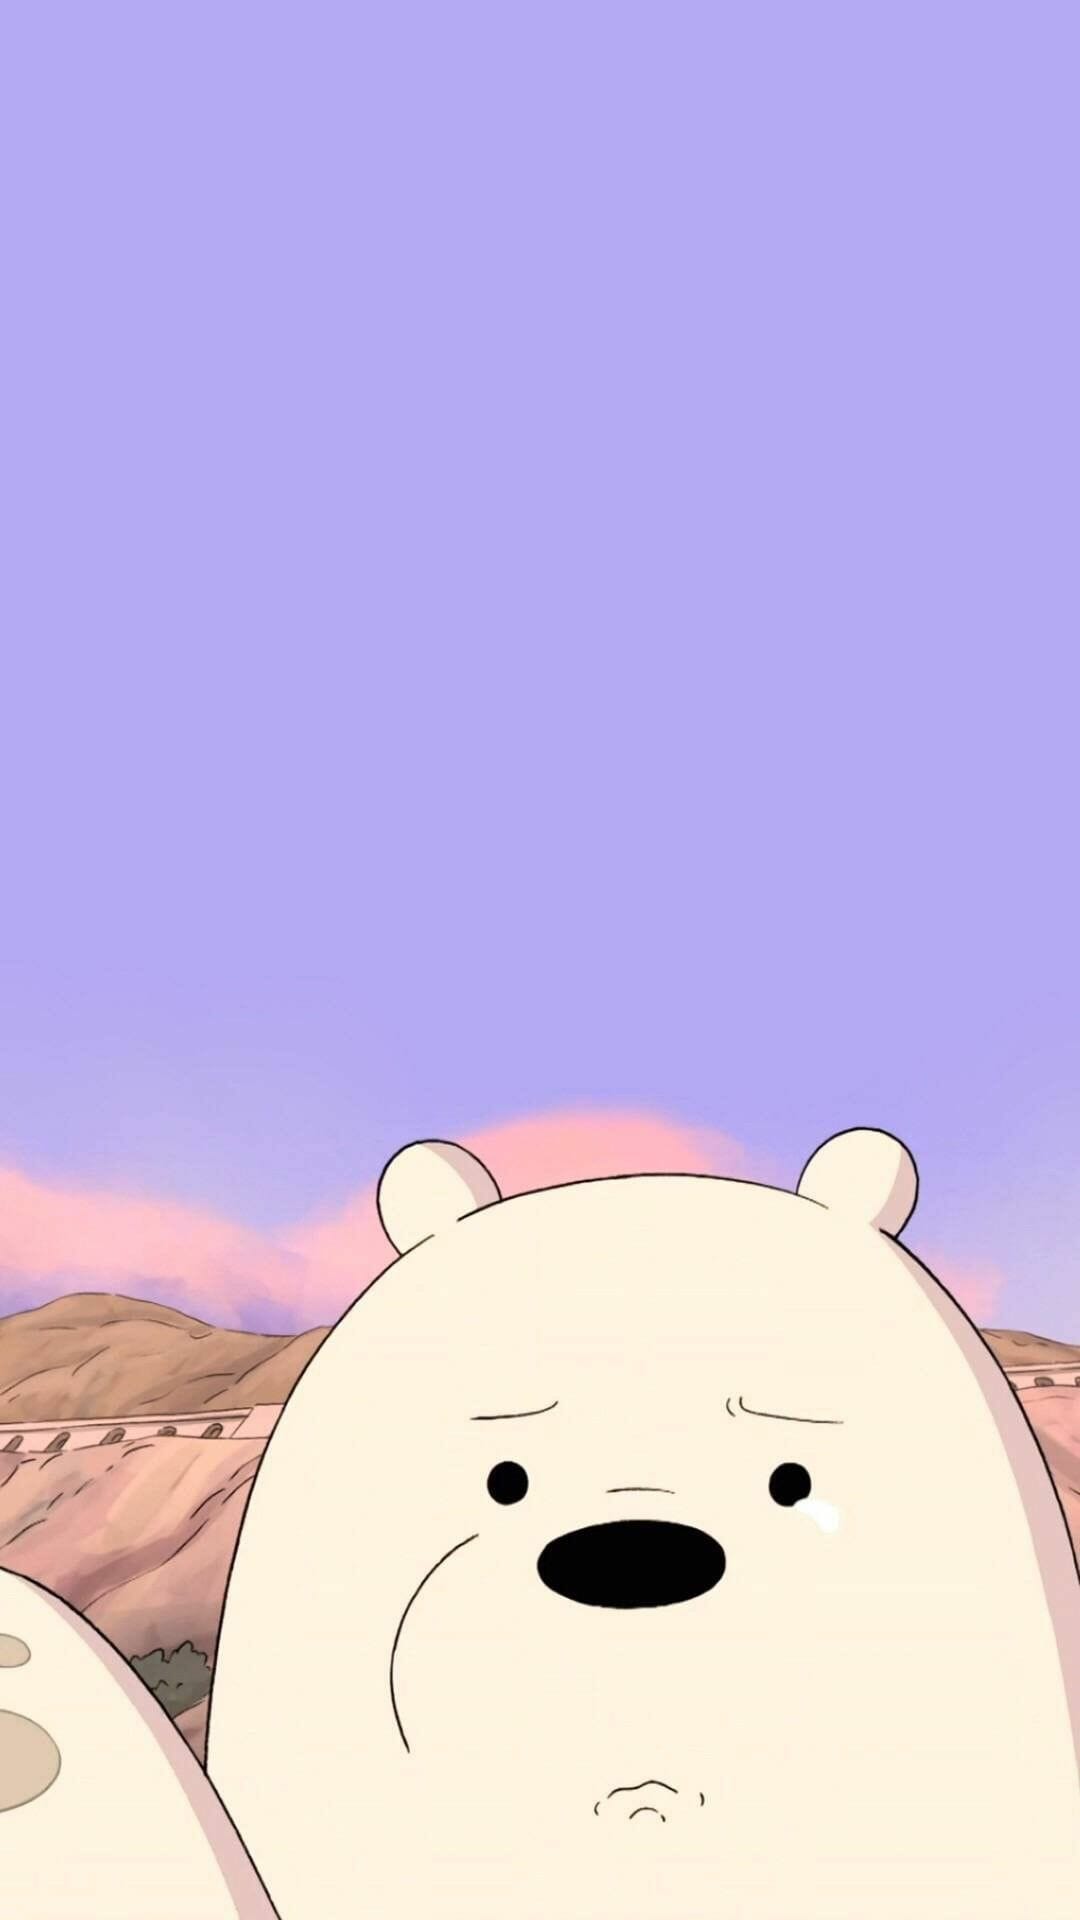 We Bare Bears Wallpaper / iPhone HD Wallpaper Background Download HD Wallpaper (Desktop Background / Android / iPhone) (1080p, 4k) (1080x1920)